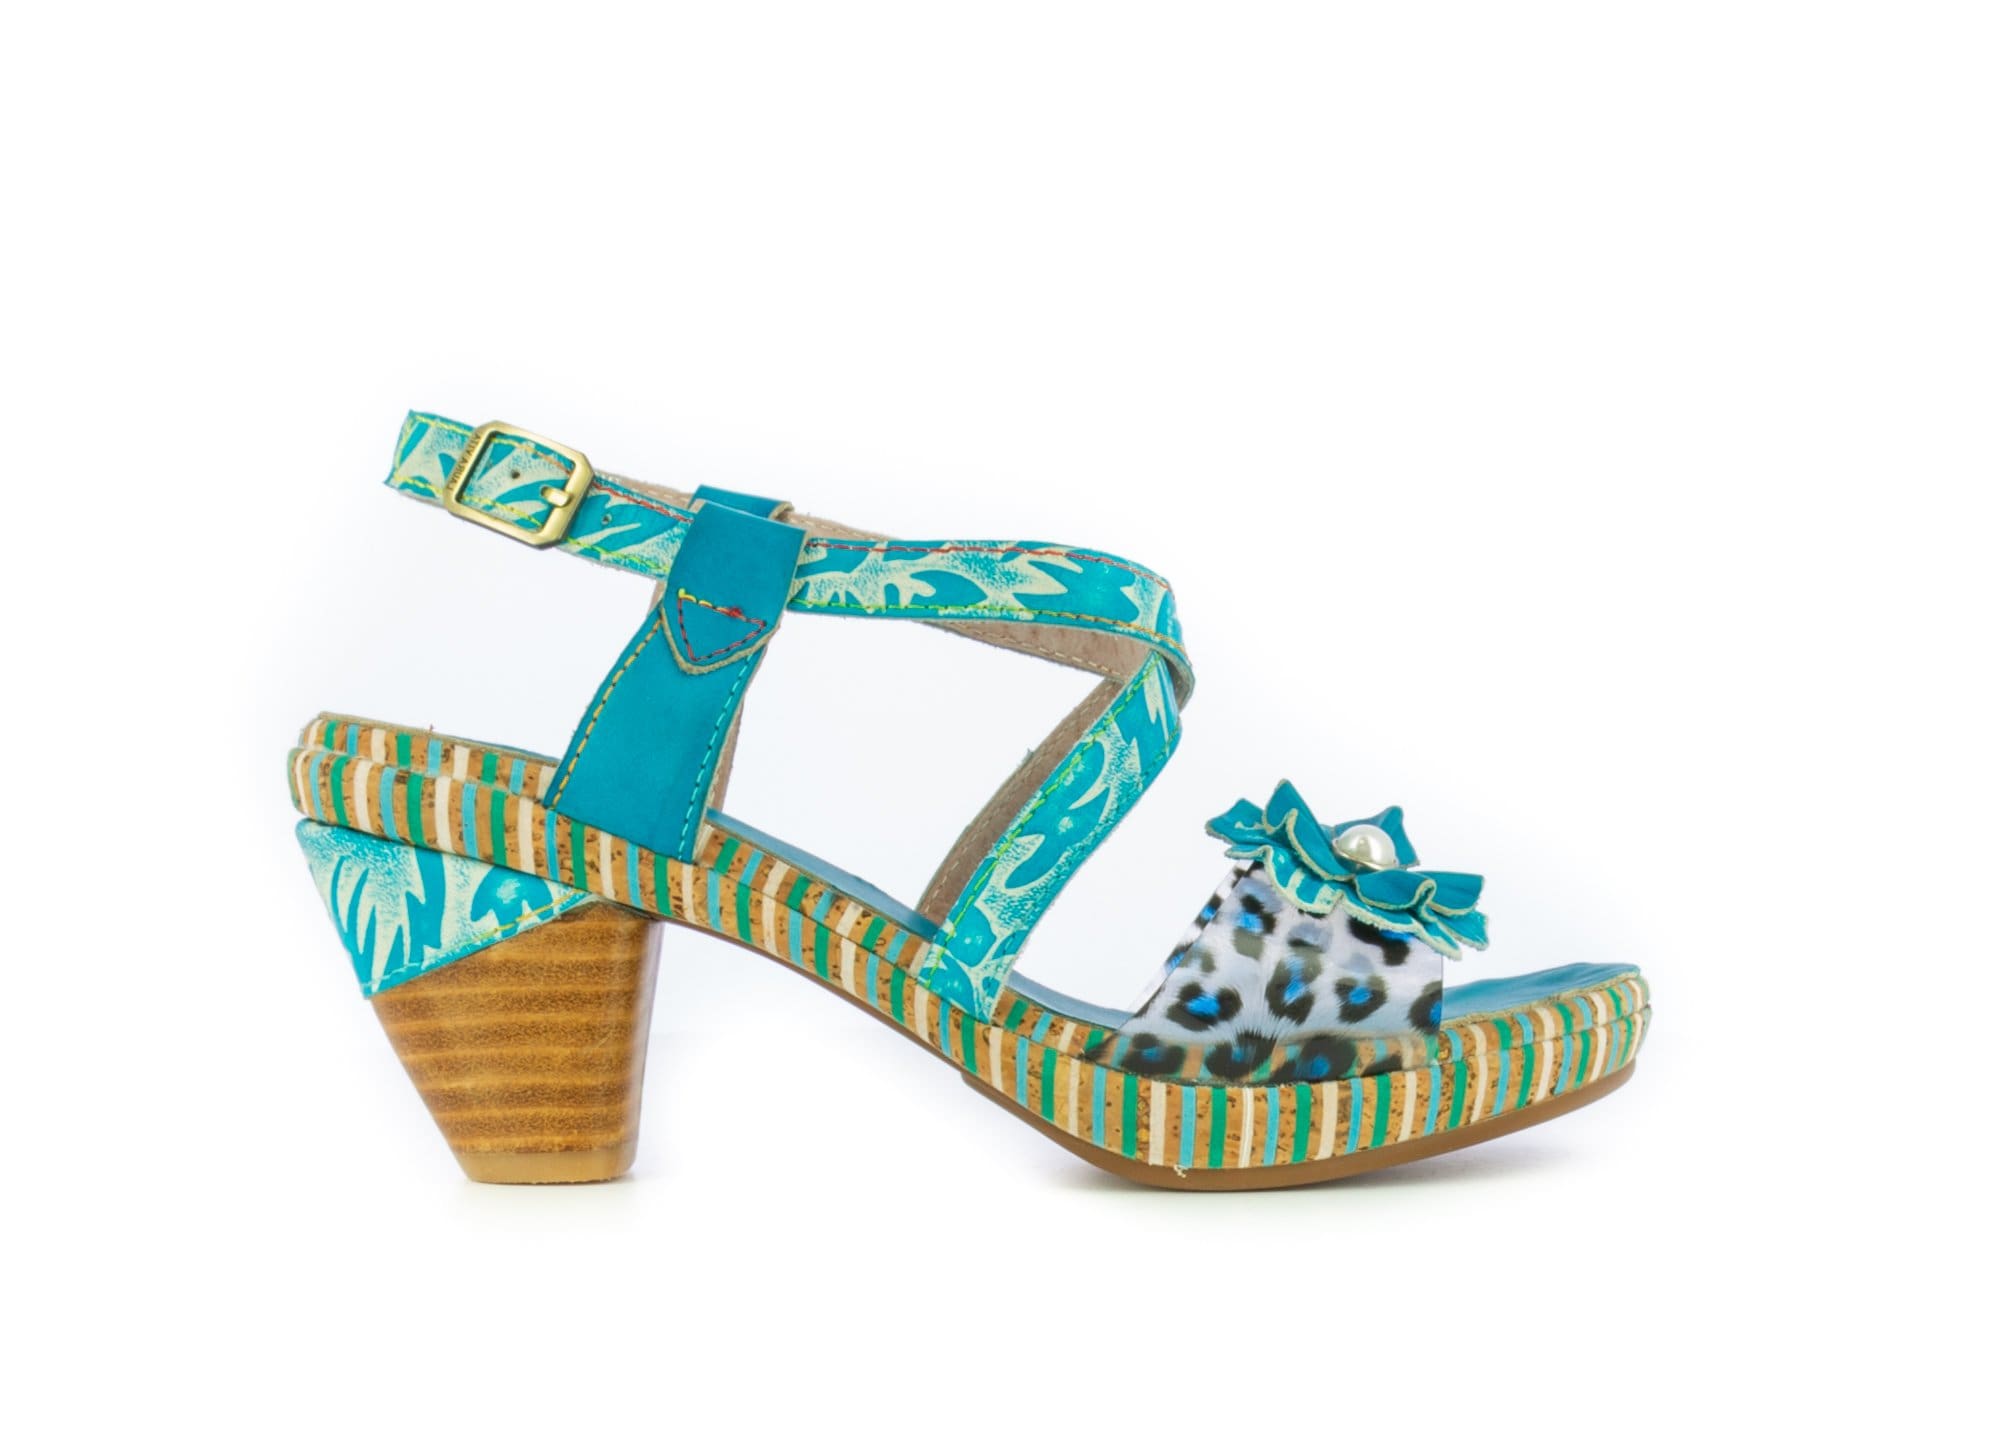 Chaussures BECLFORTO 31 - 35 / TURQUOISE - Sandale